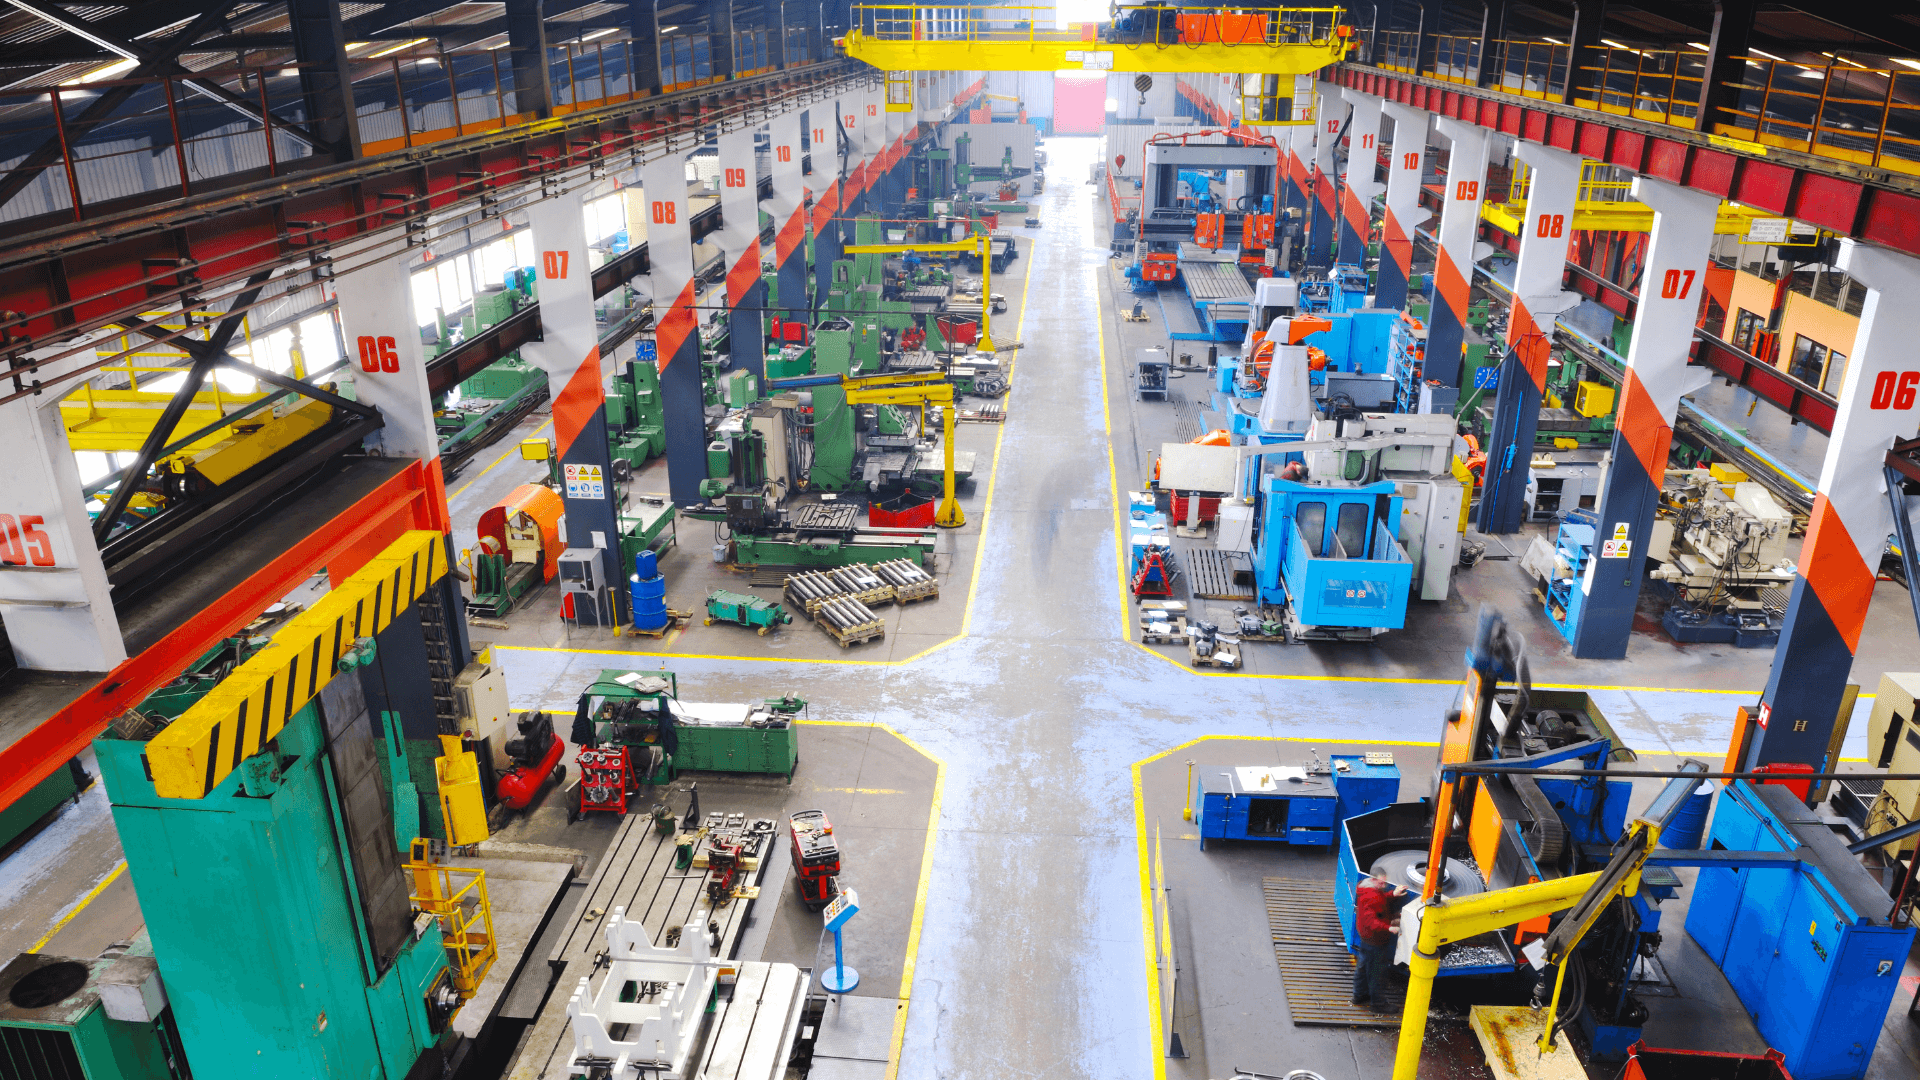 This factory floor could have improved efficiency with a real-time data solution. Which solution would be best? MES vs IoT?